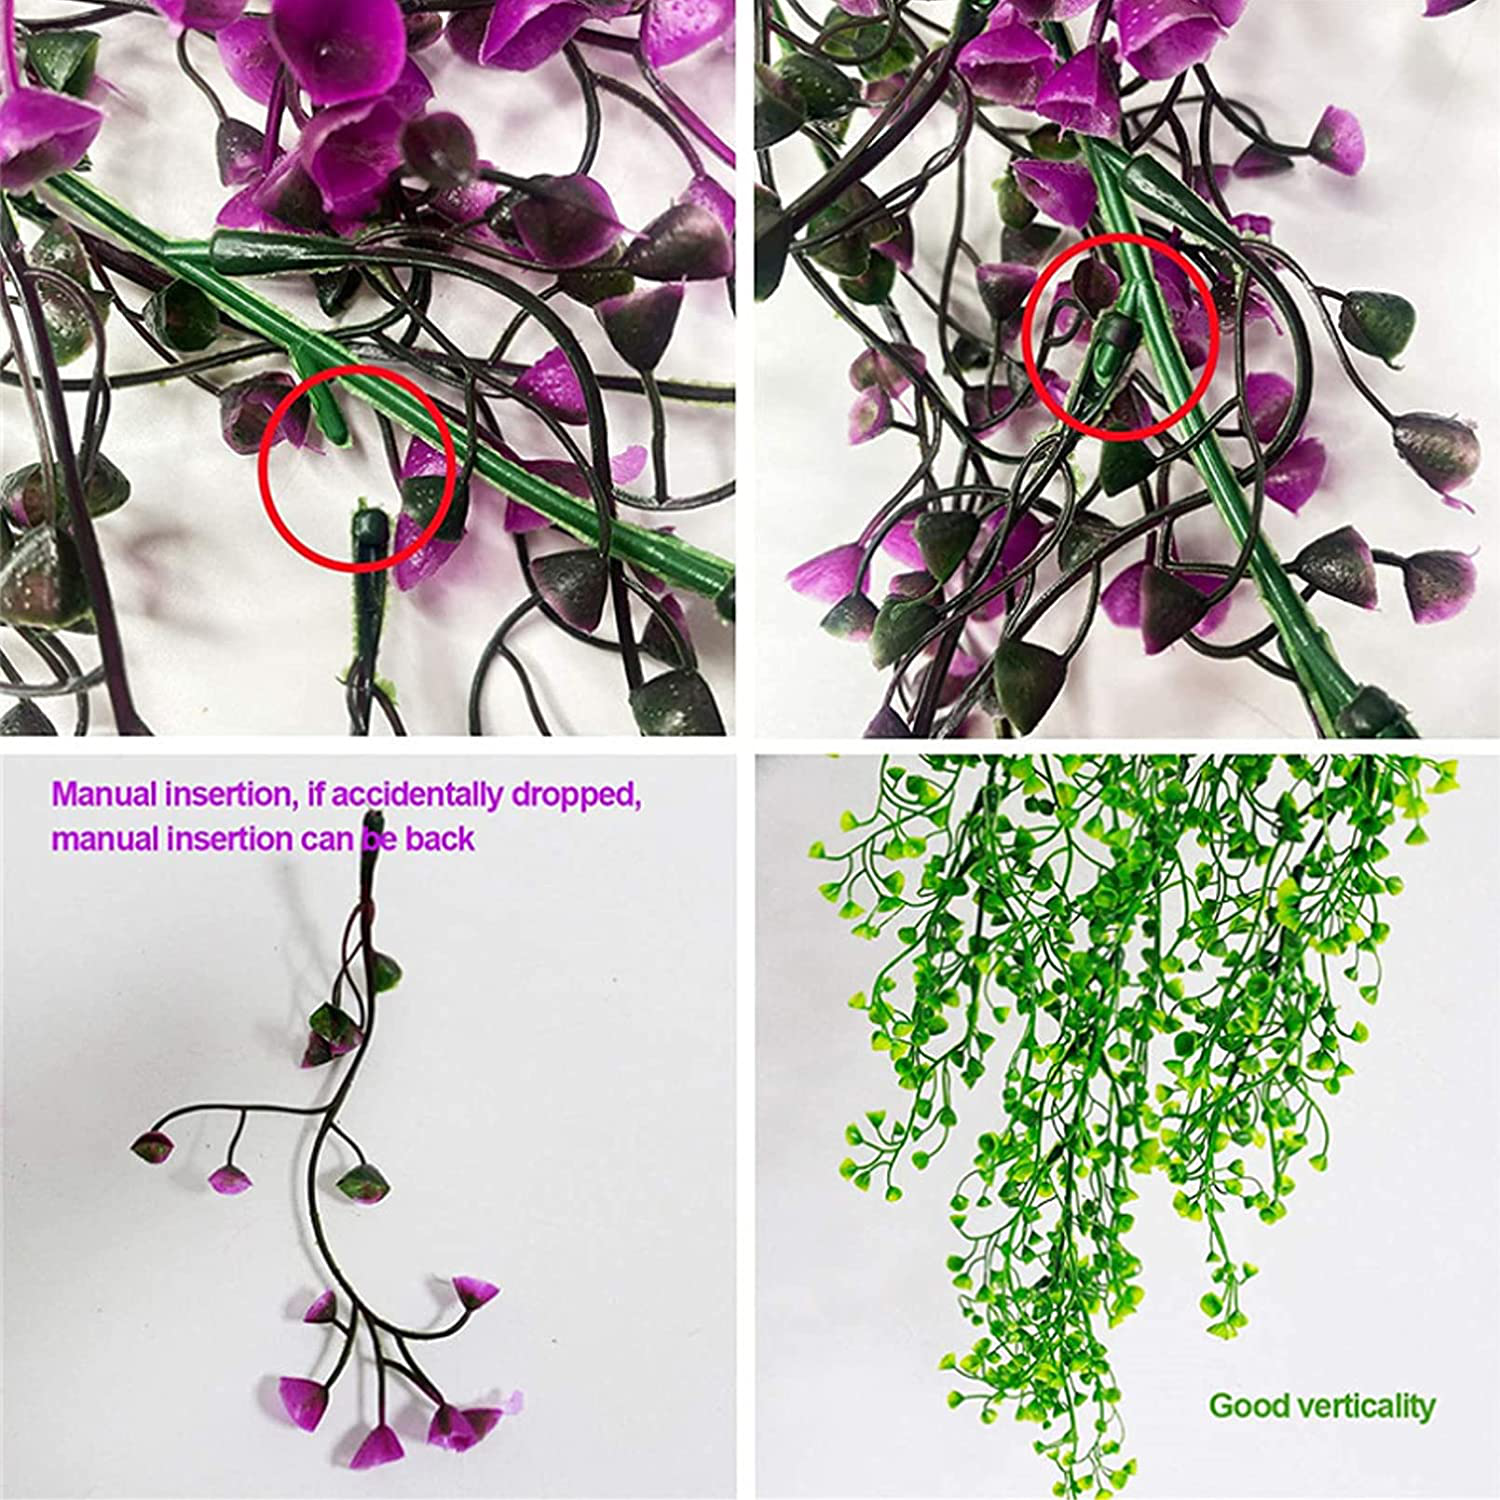 Hamiledyi Reptile Plants Hanging Fake Vines Climbing Terrarium Plant Kit with Suction Cup Amphibian Tank Habitat Decorations for Hermit Crabs Snakes Bearded Dragons Chameleons Frogs Lizards Geckos